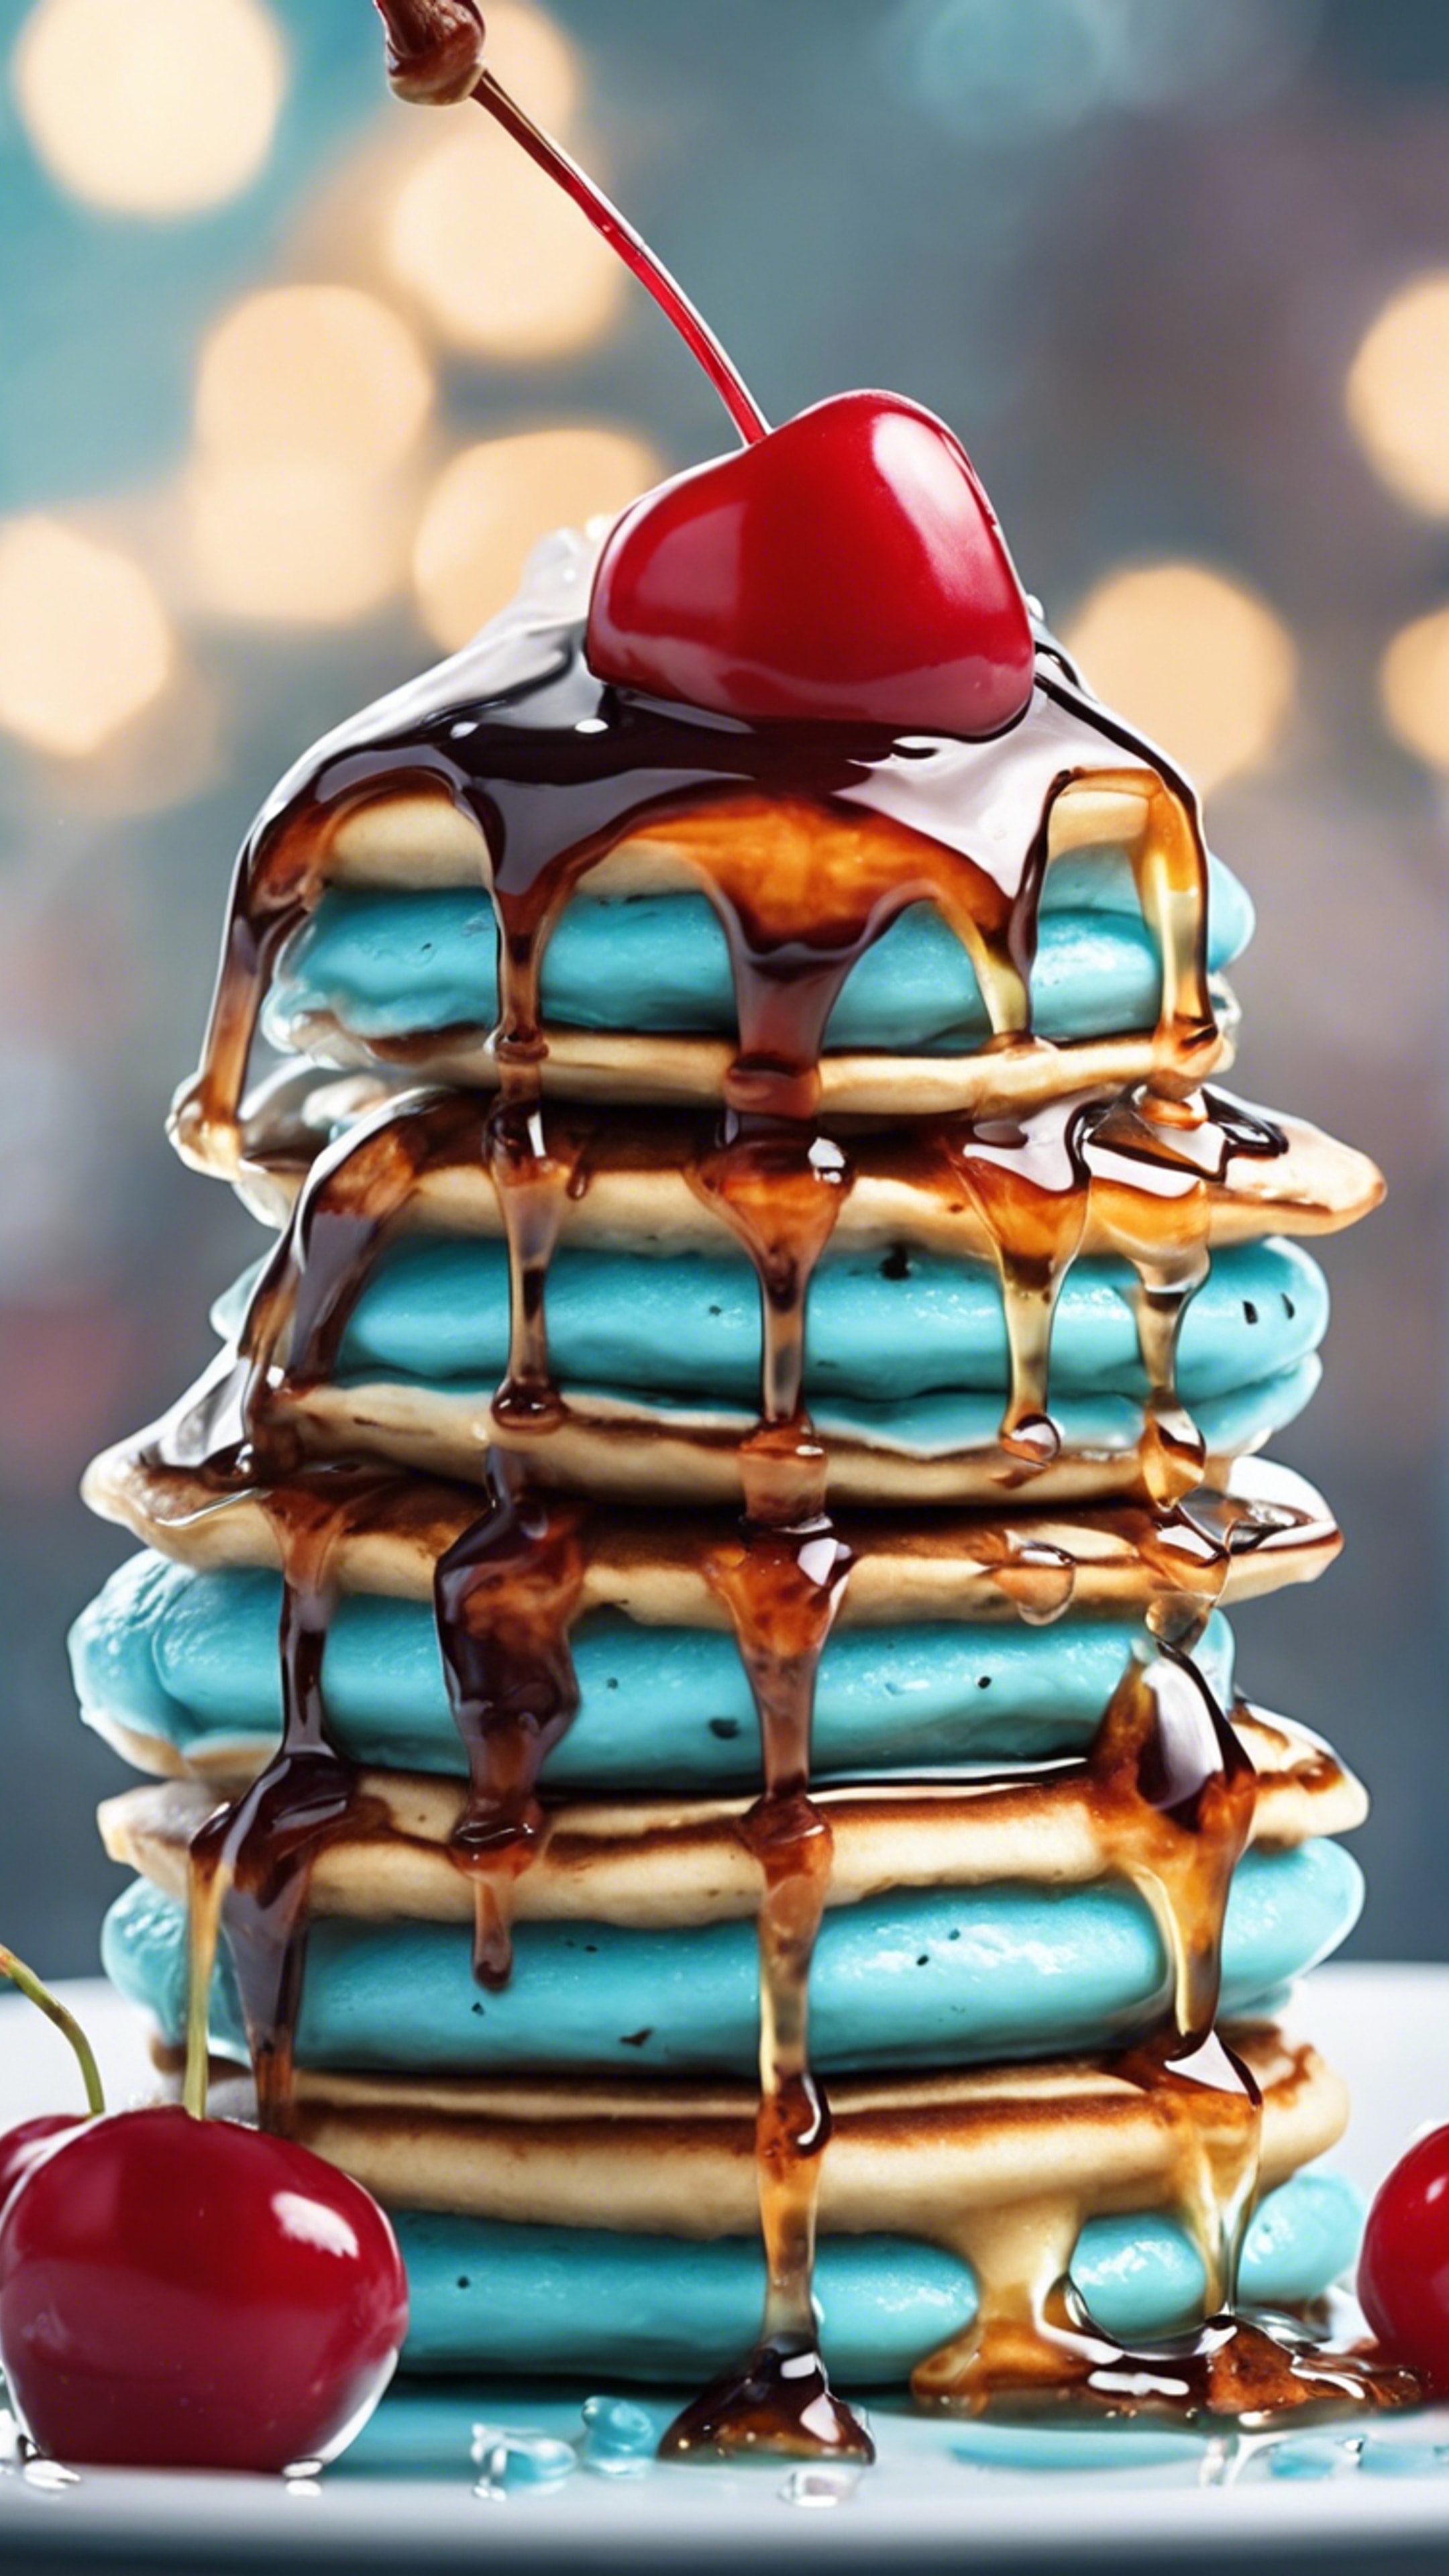 A stack of kawaii light blue pancakes dripping with syrup and a cherry on top. Tapeet[05c3a9af3a95463c8379]